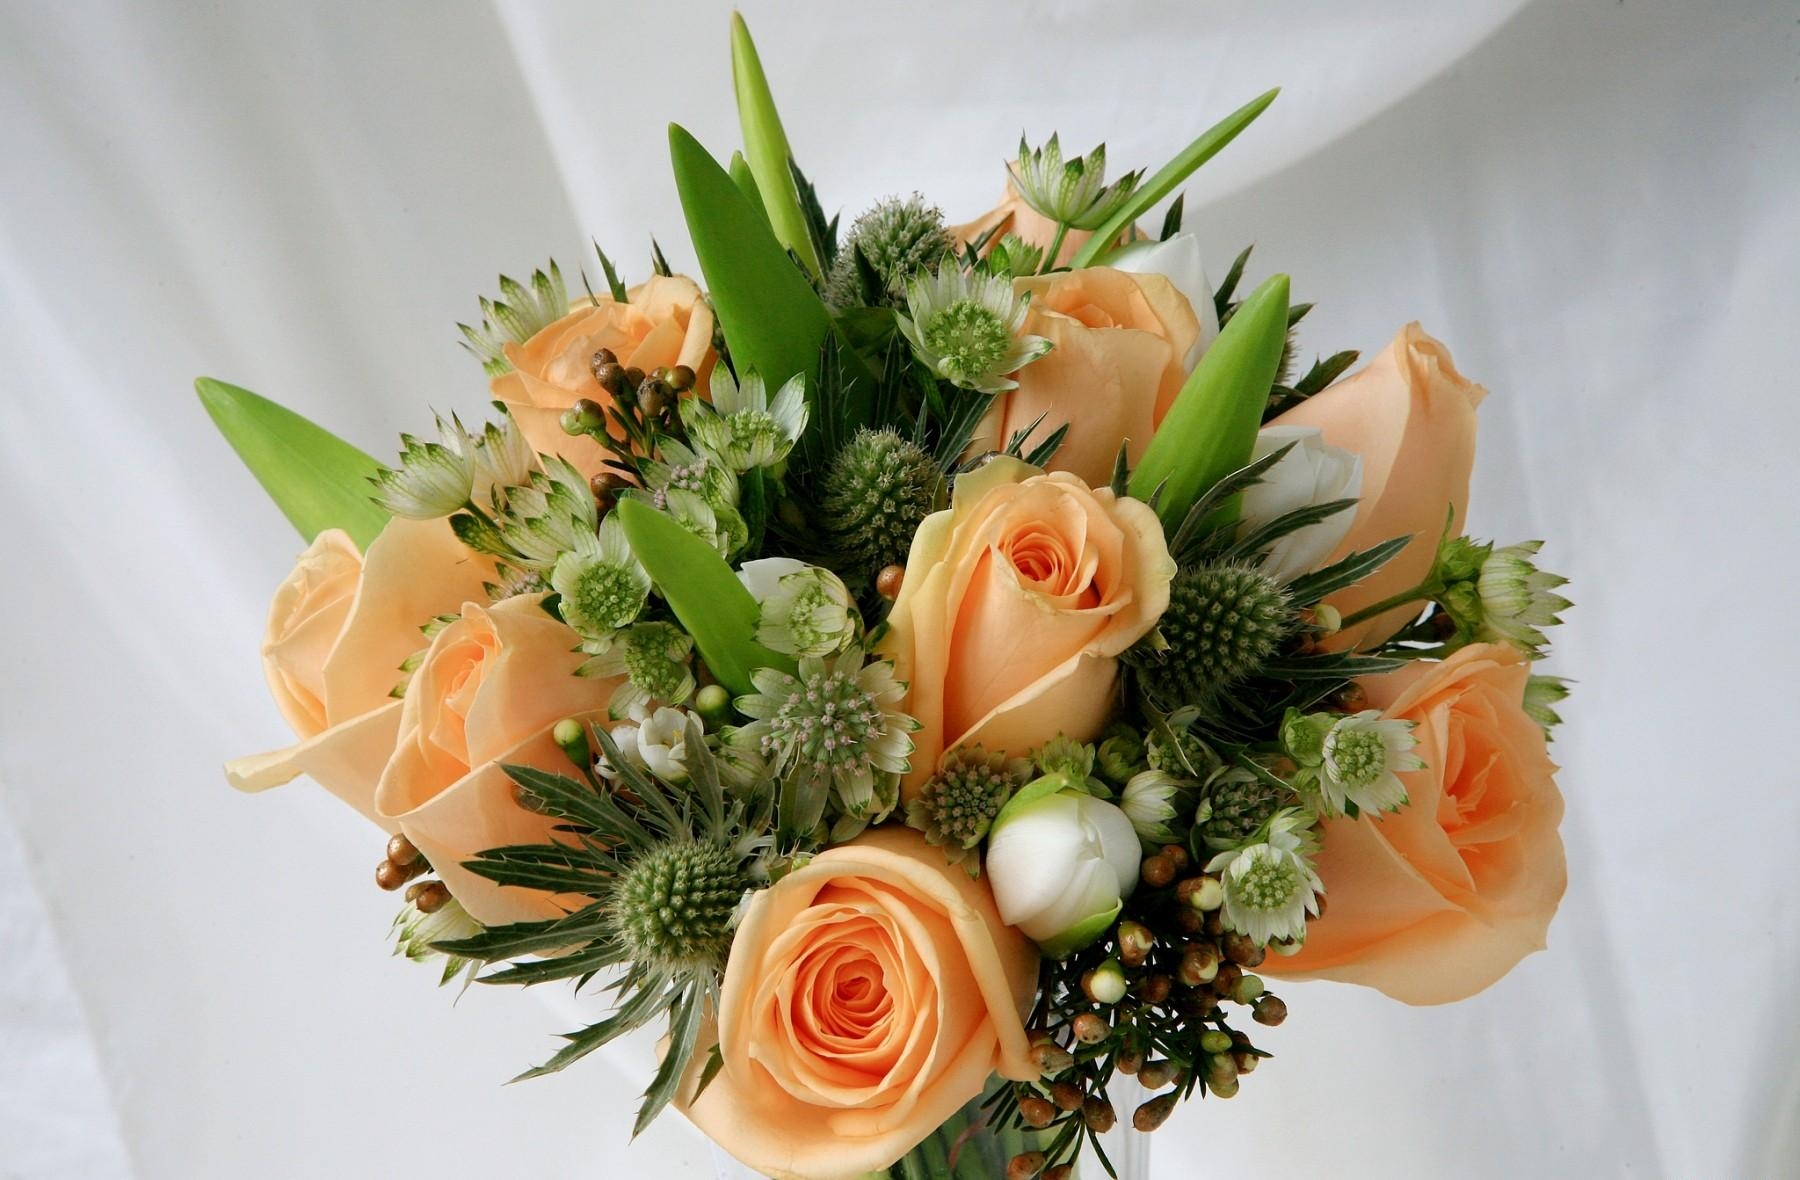 flowers, roses, registration, typography, bouquet, buds